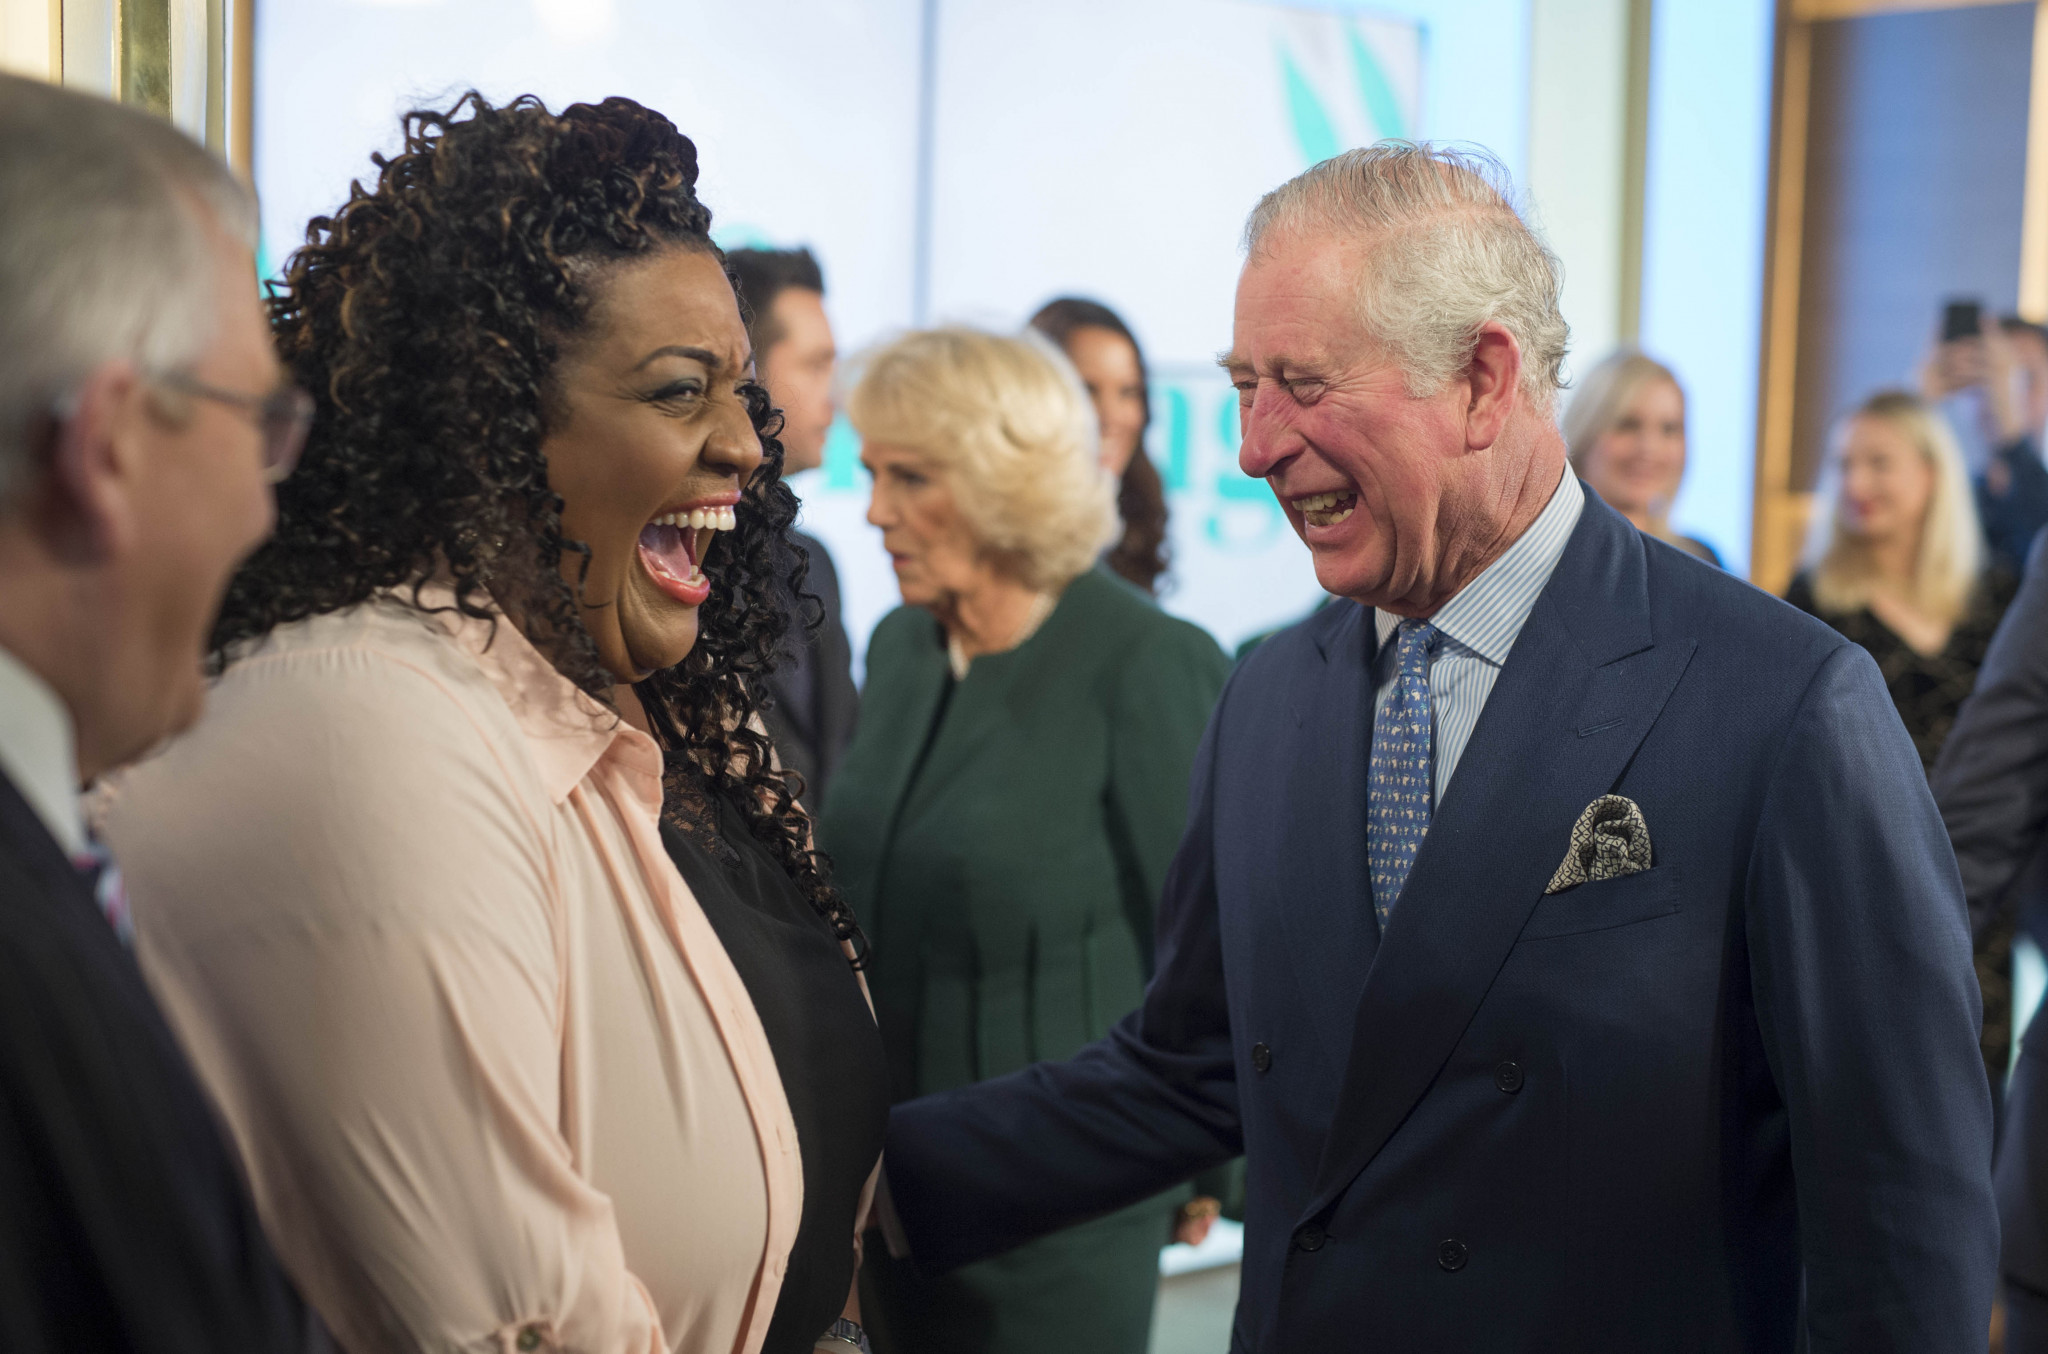 Alison Hammond, left, will be the voice of Birmingham 2022's venues ©Getty Images